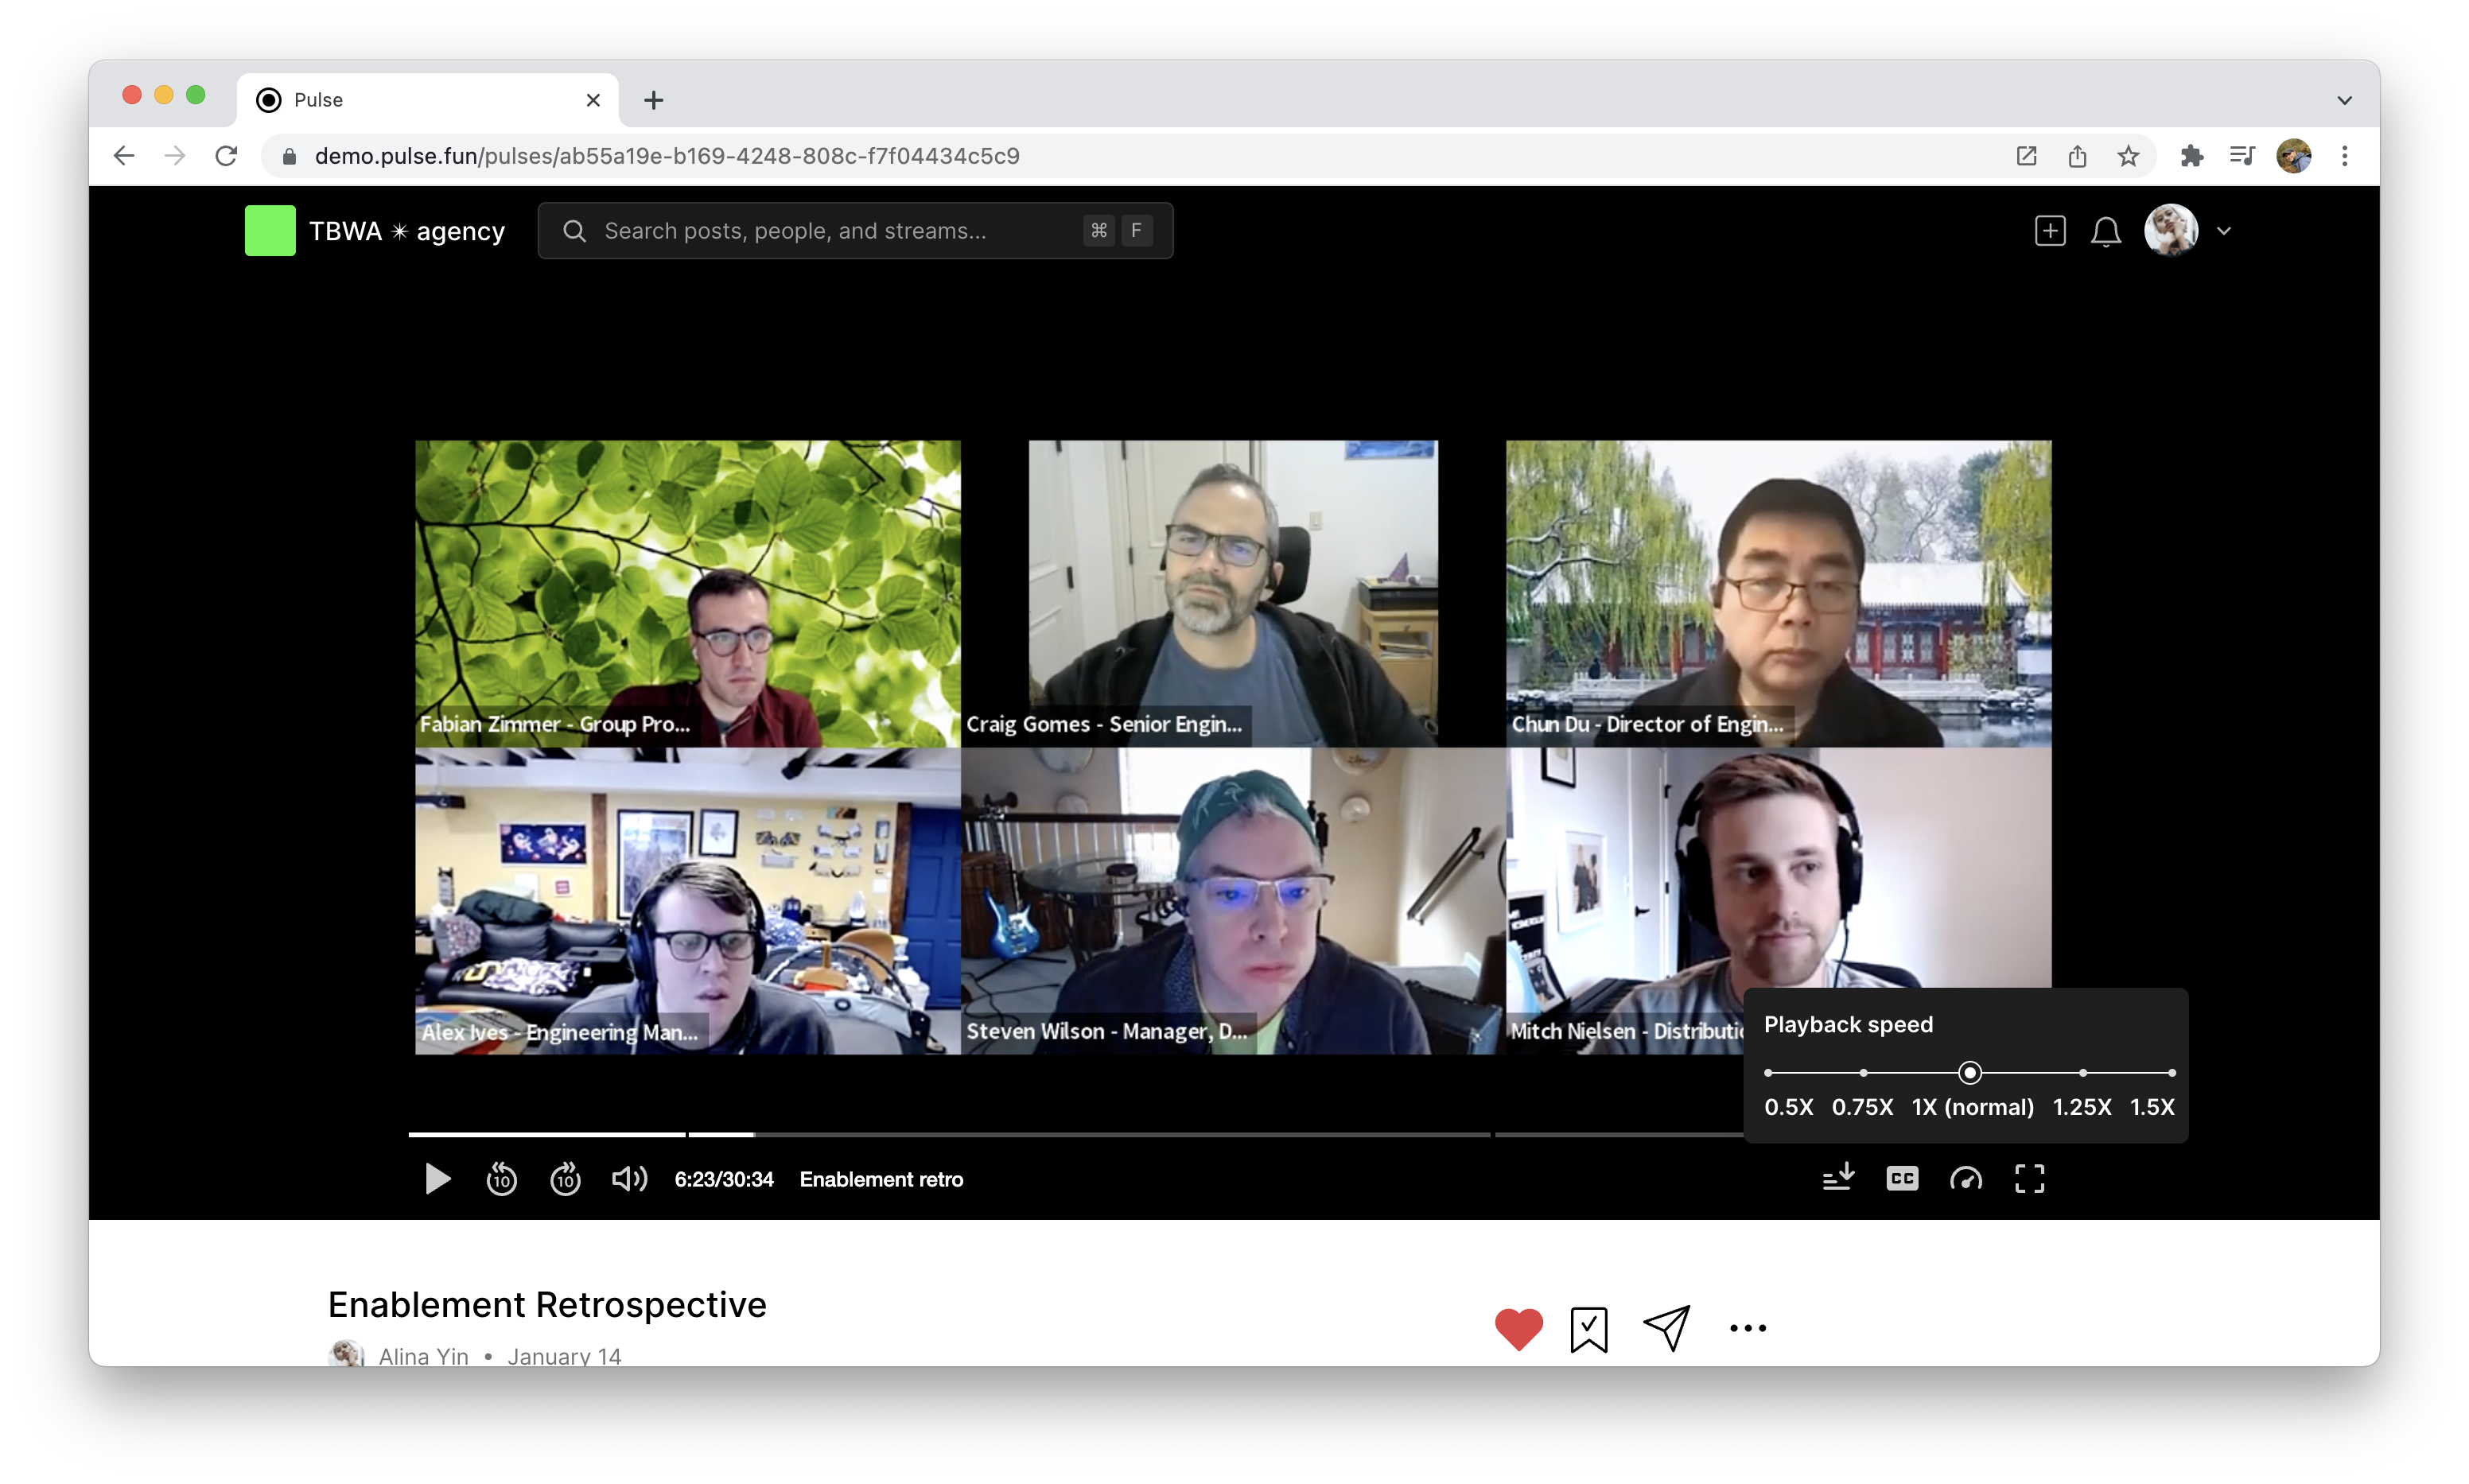 Video player for internal meeting recordings